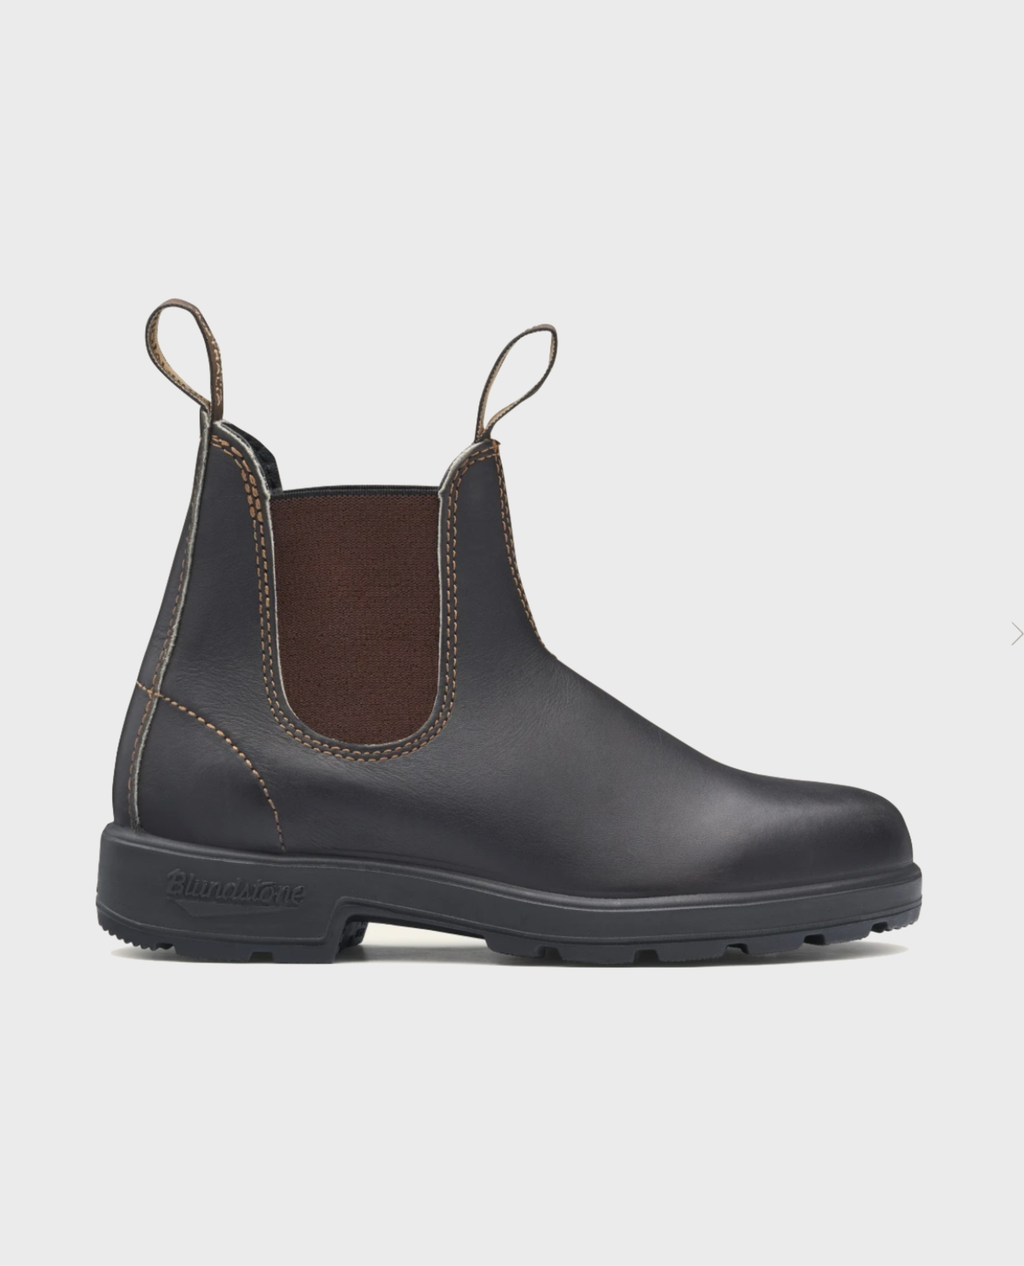 M's #500 Chelsea Boot- Stout Brown - Island Outfitters